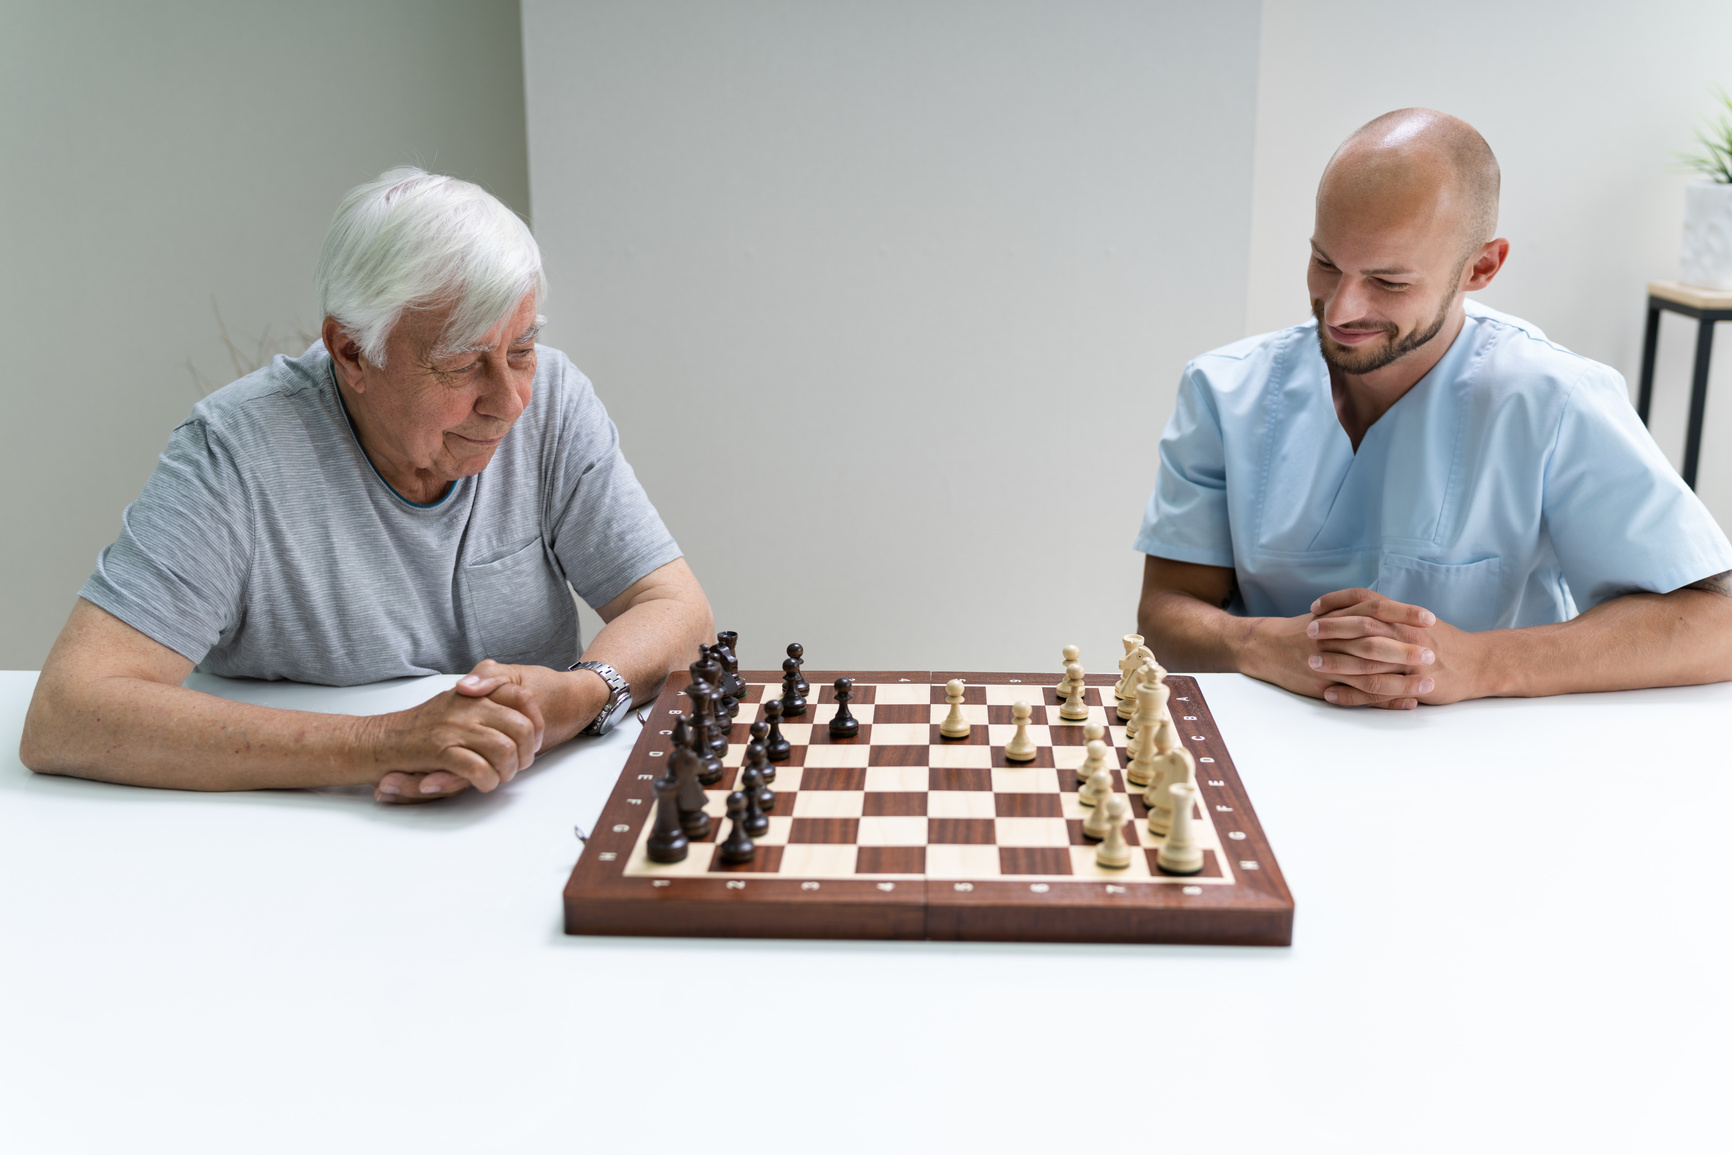 Elderly Senior Playing Chess With Caregiver